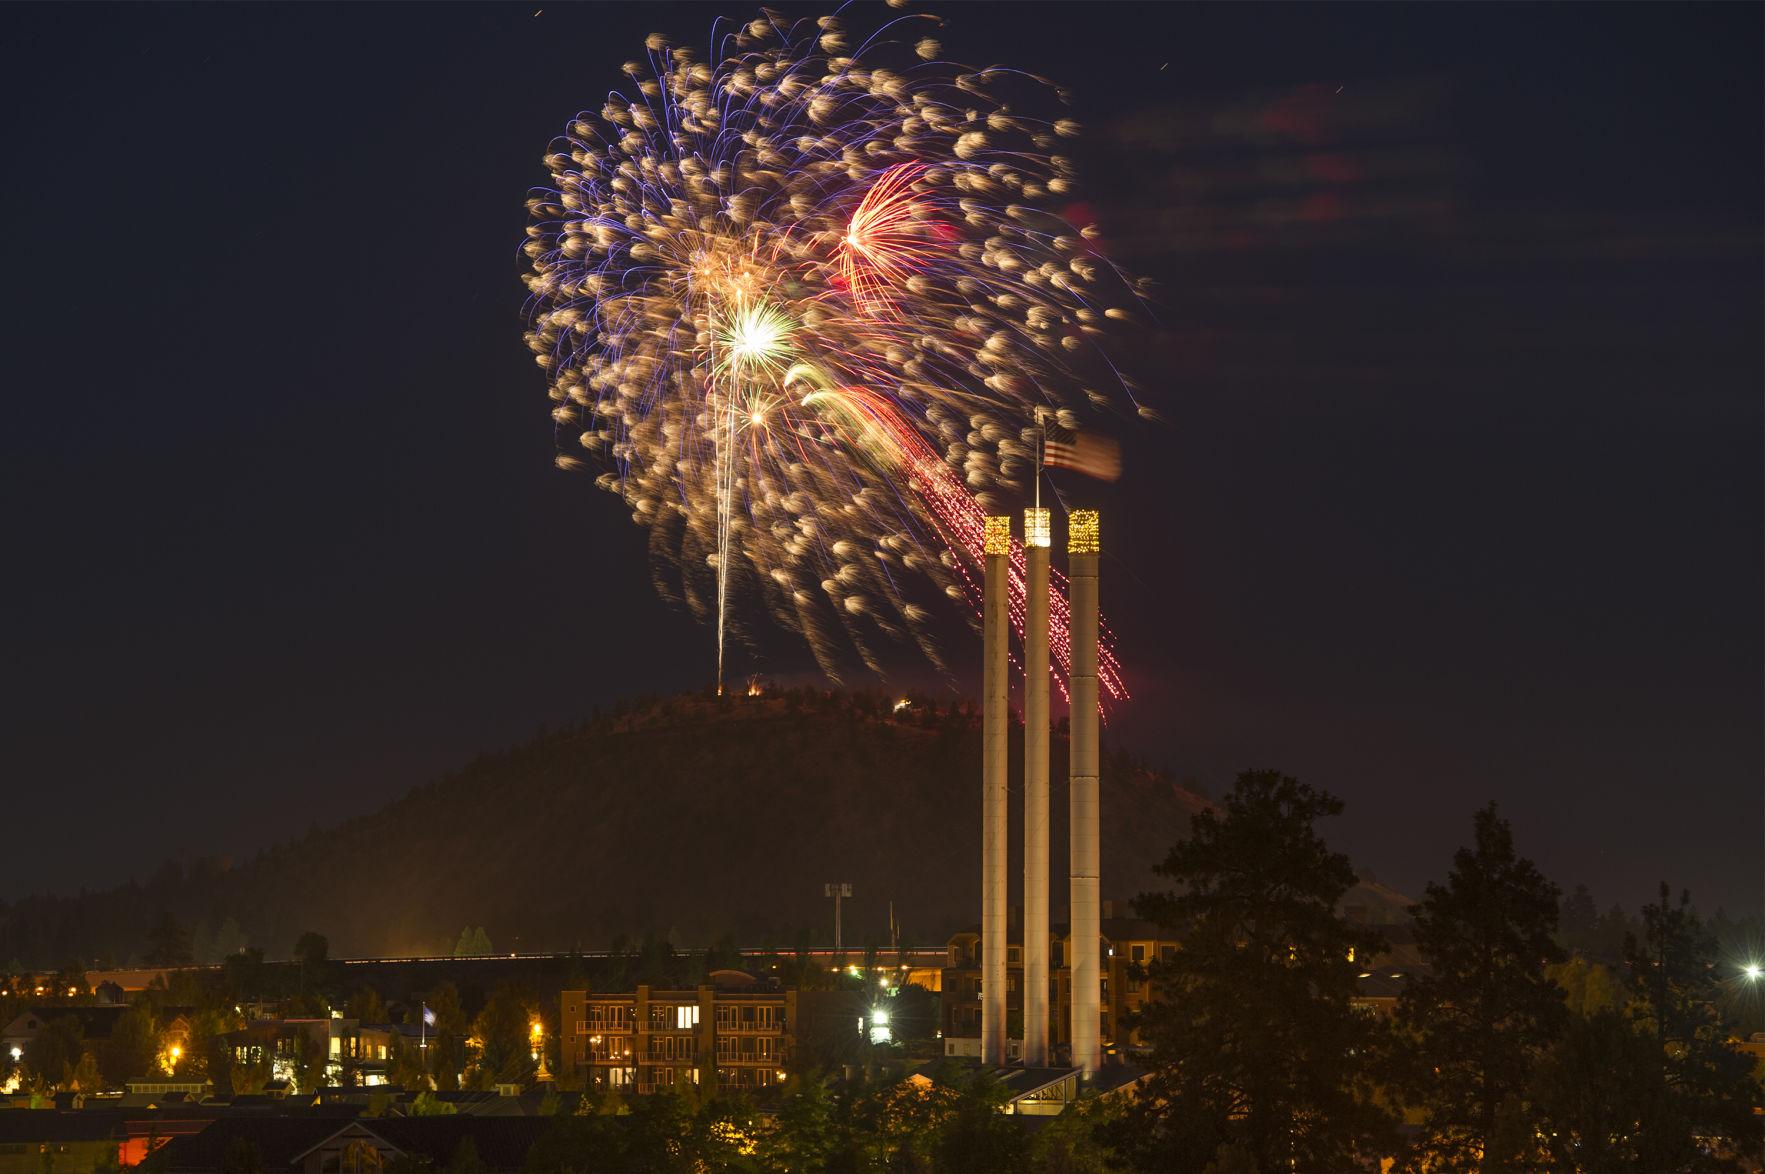 No parking at Pilot Butte for fireworks show this year Local&State